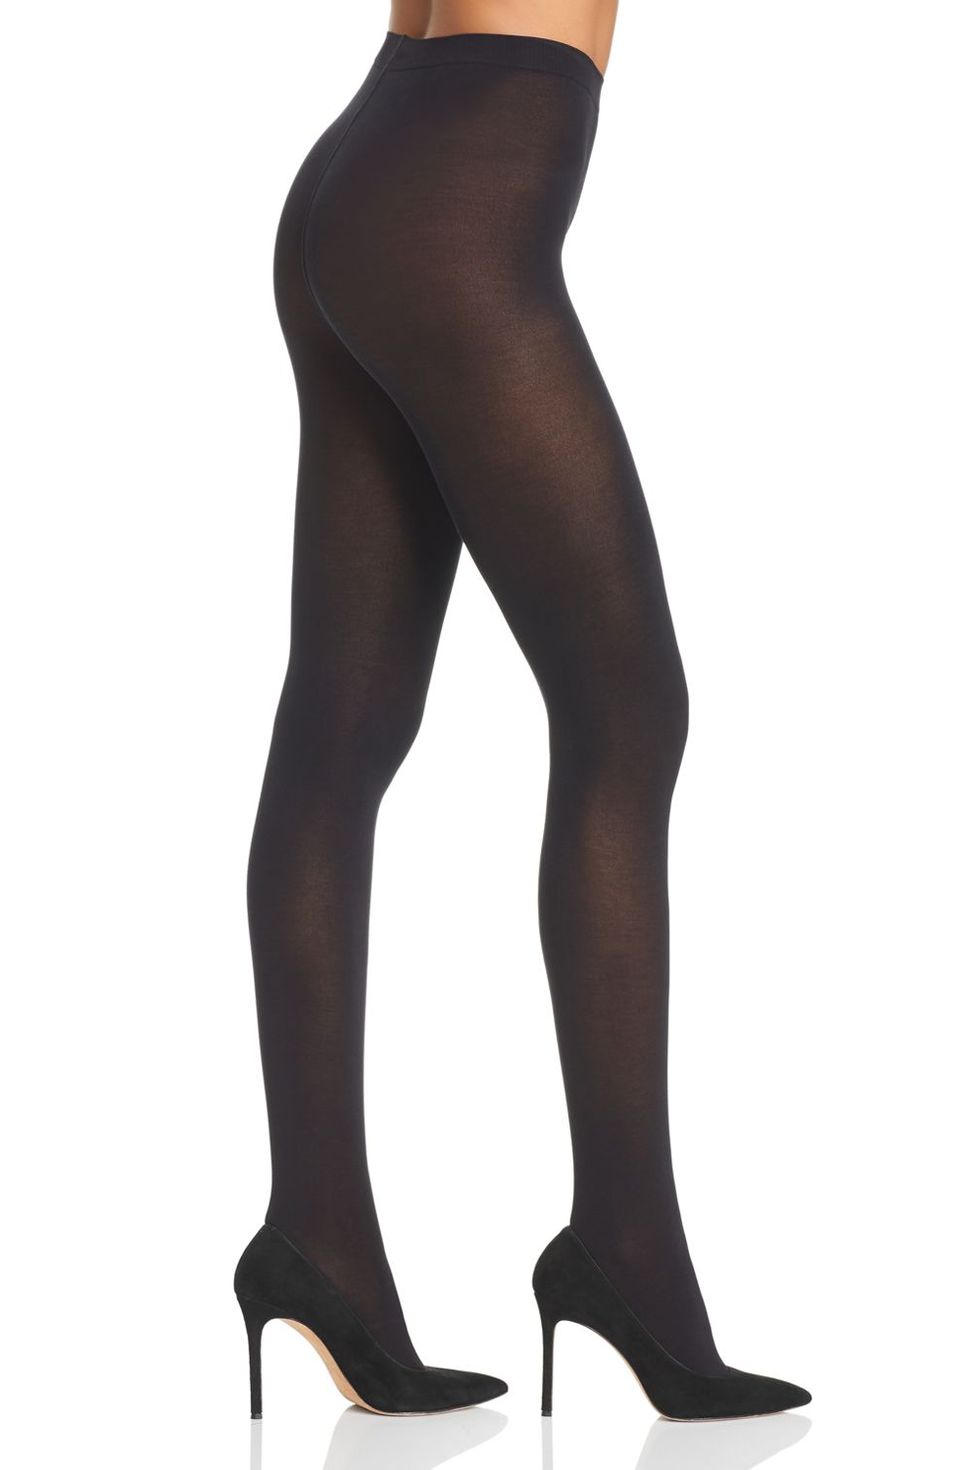 Commando Ultimate Opaque Control Tights In Stock At UK Tights